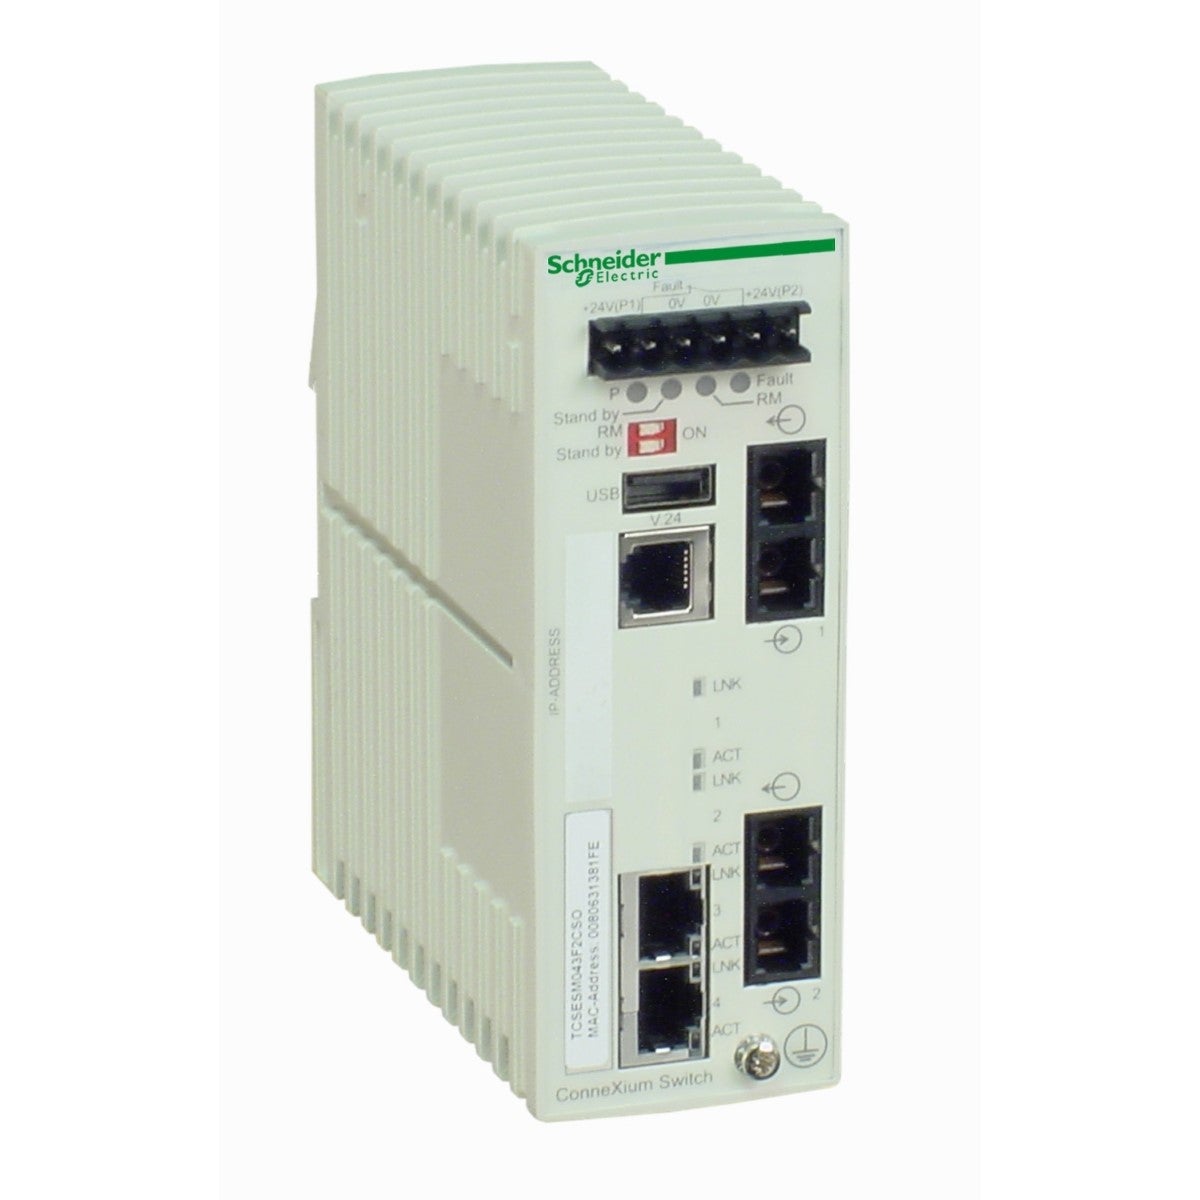 ConneXium Managed Switch - 2 ports for copper + 2 ports for fiber optic single-mode